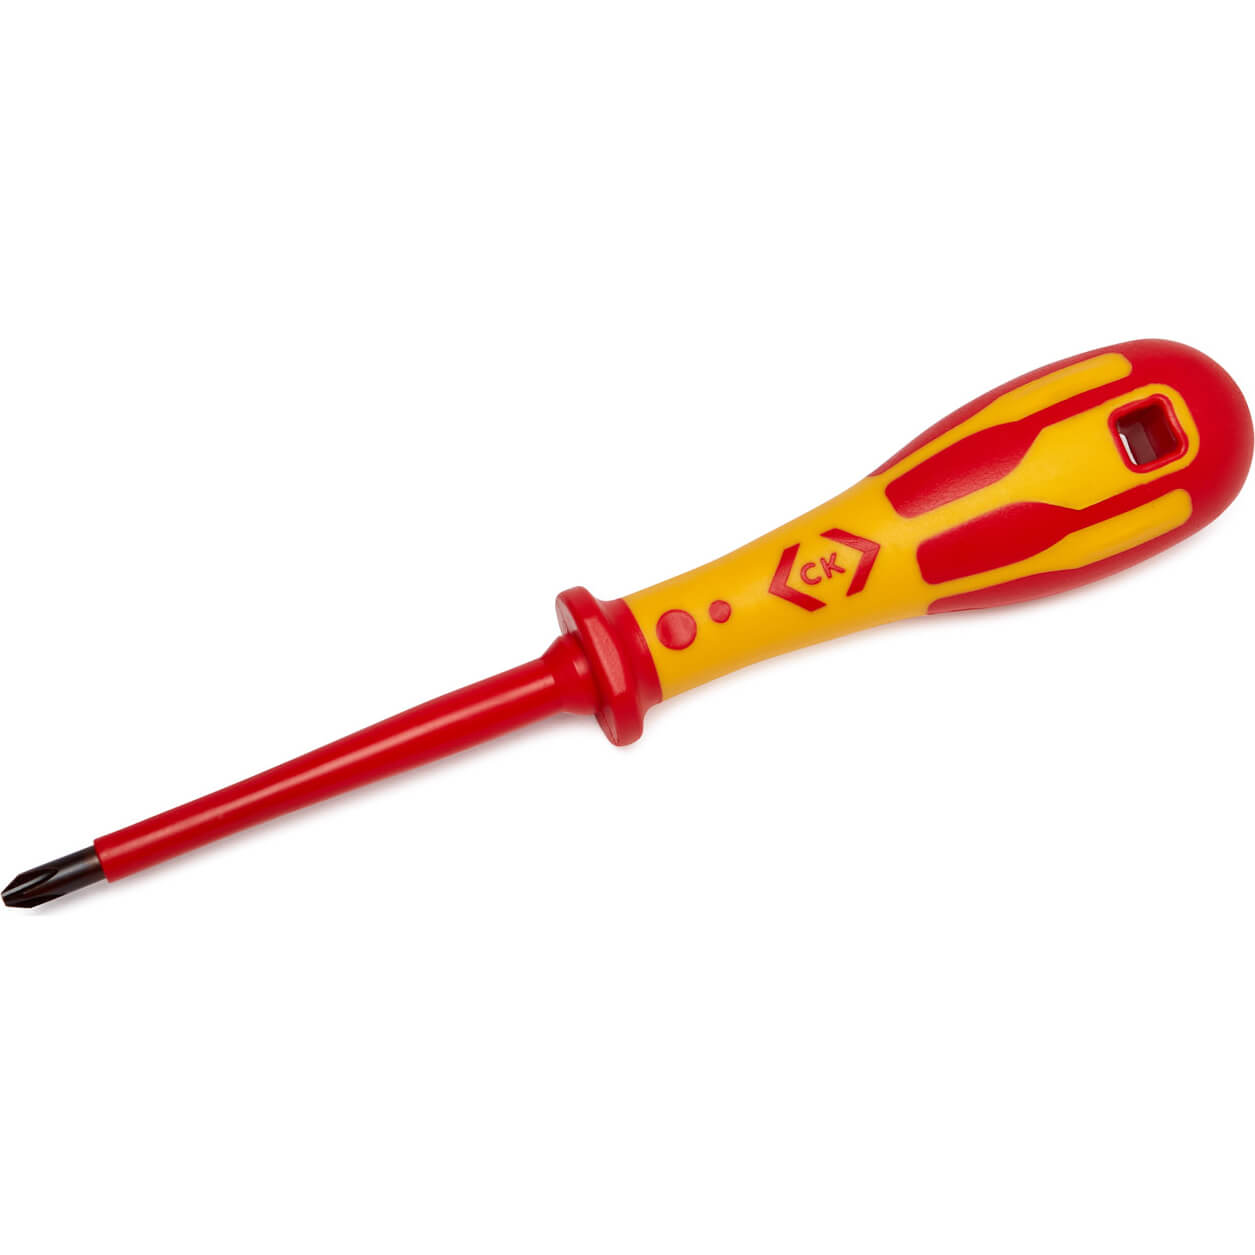 Image of CK Dextro VDE Insulated Phillips Screwdriver PH1 80mm